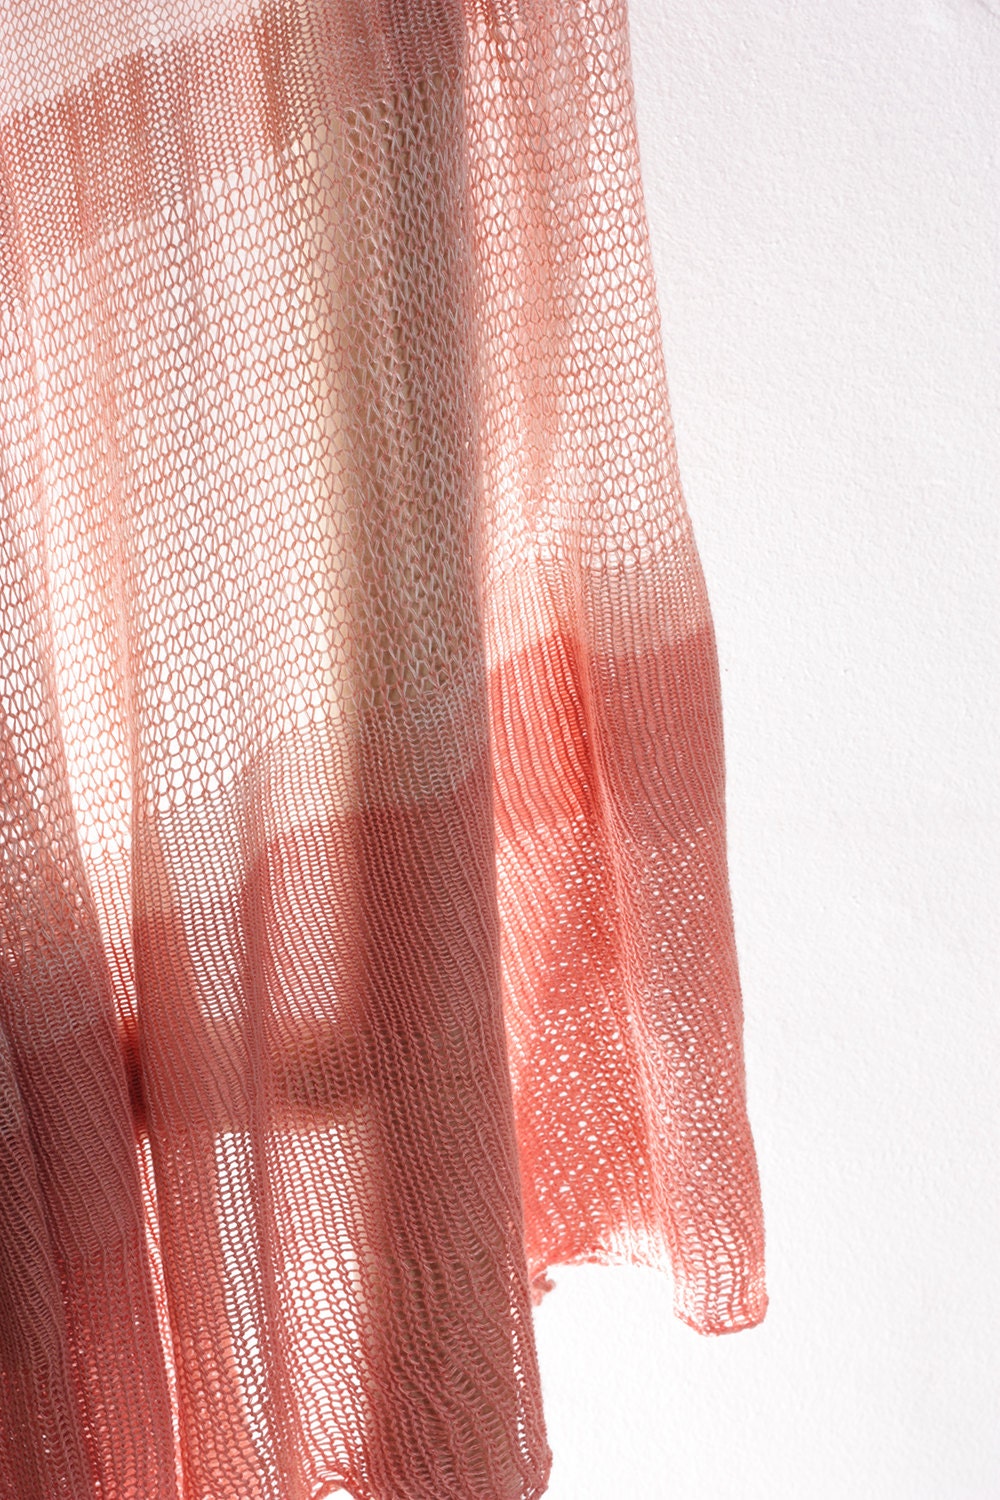 Pink Scarf , knitted lace scarf, Pink  transparent shawl, Summer bamboo silk scarf - Toosha